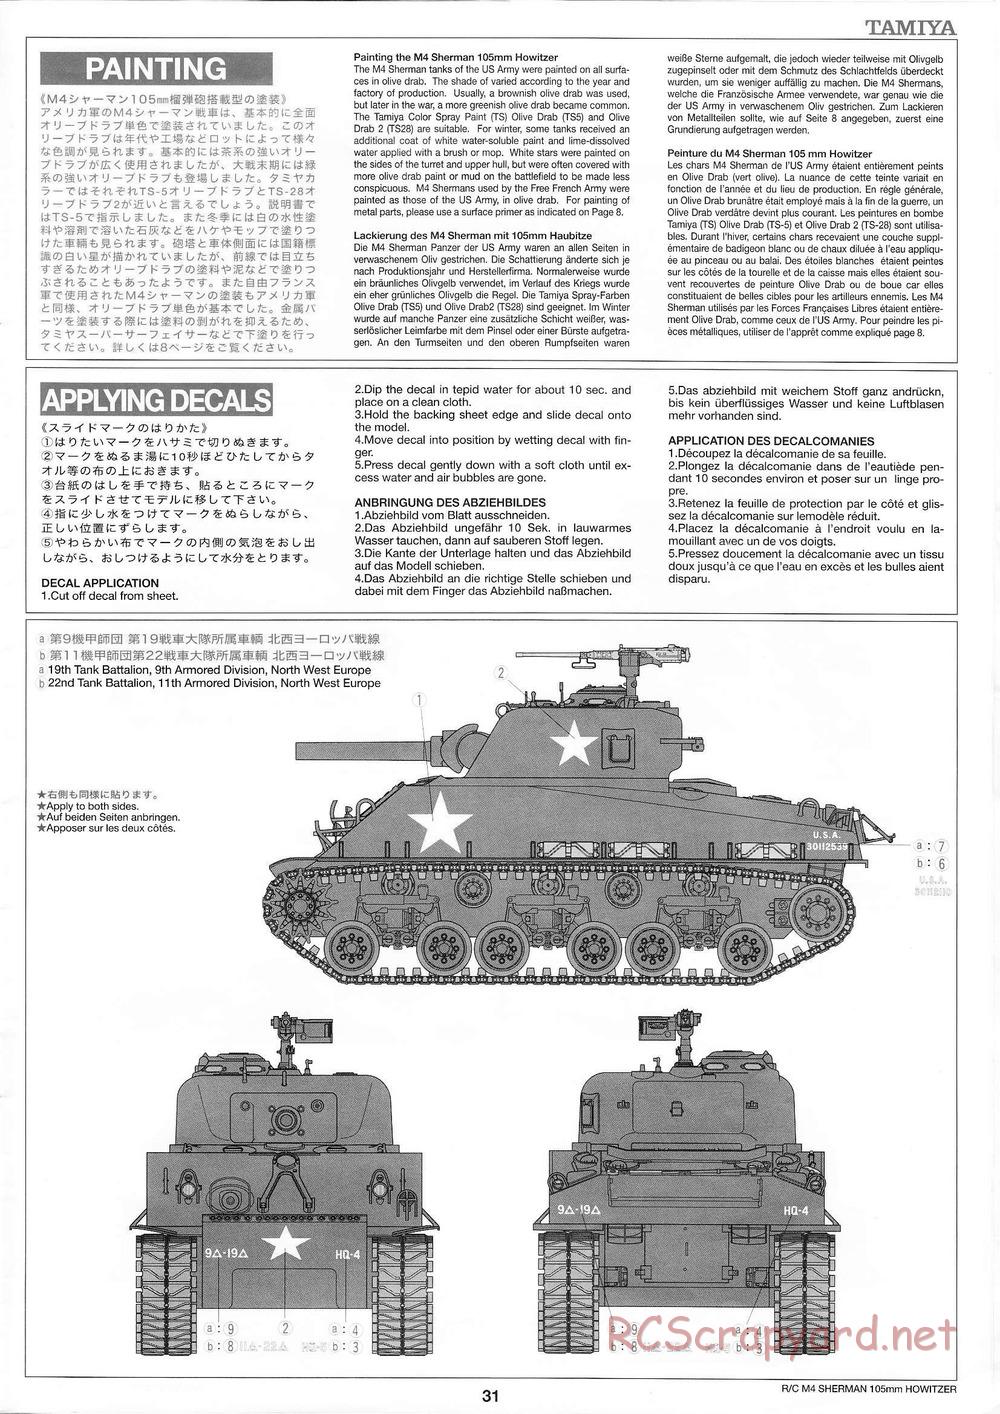 Tamiya - M4 Sherman 105mm Howitzer - 1/16 Scale Chassis - Manual - Page 34